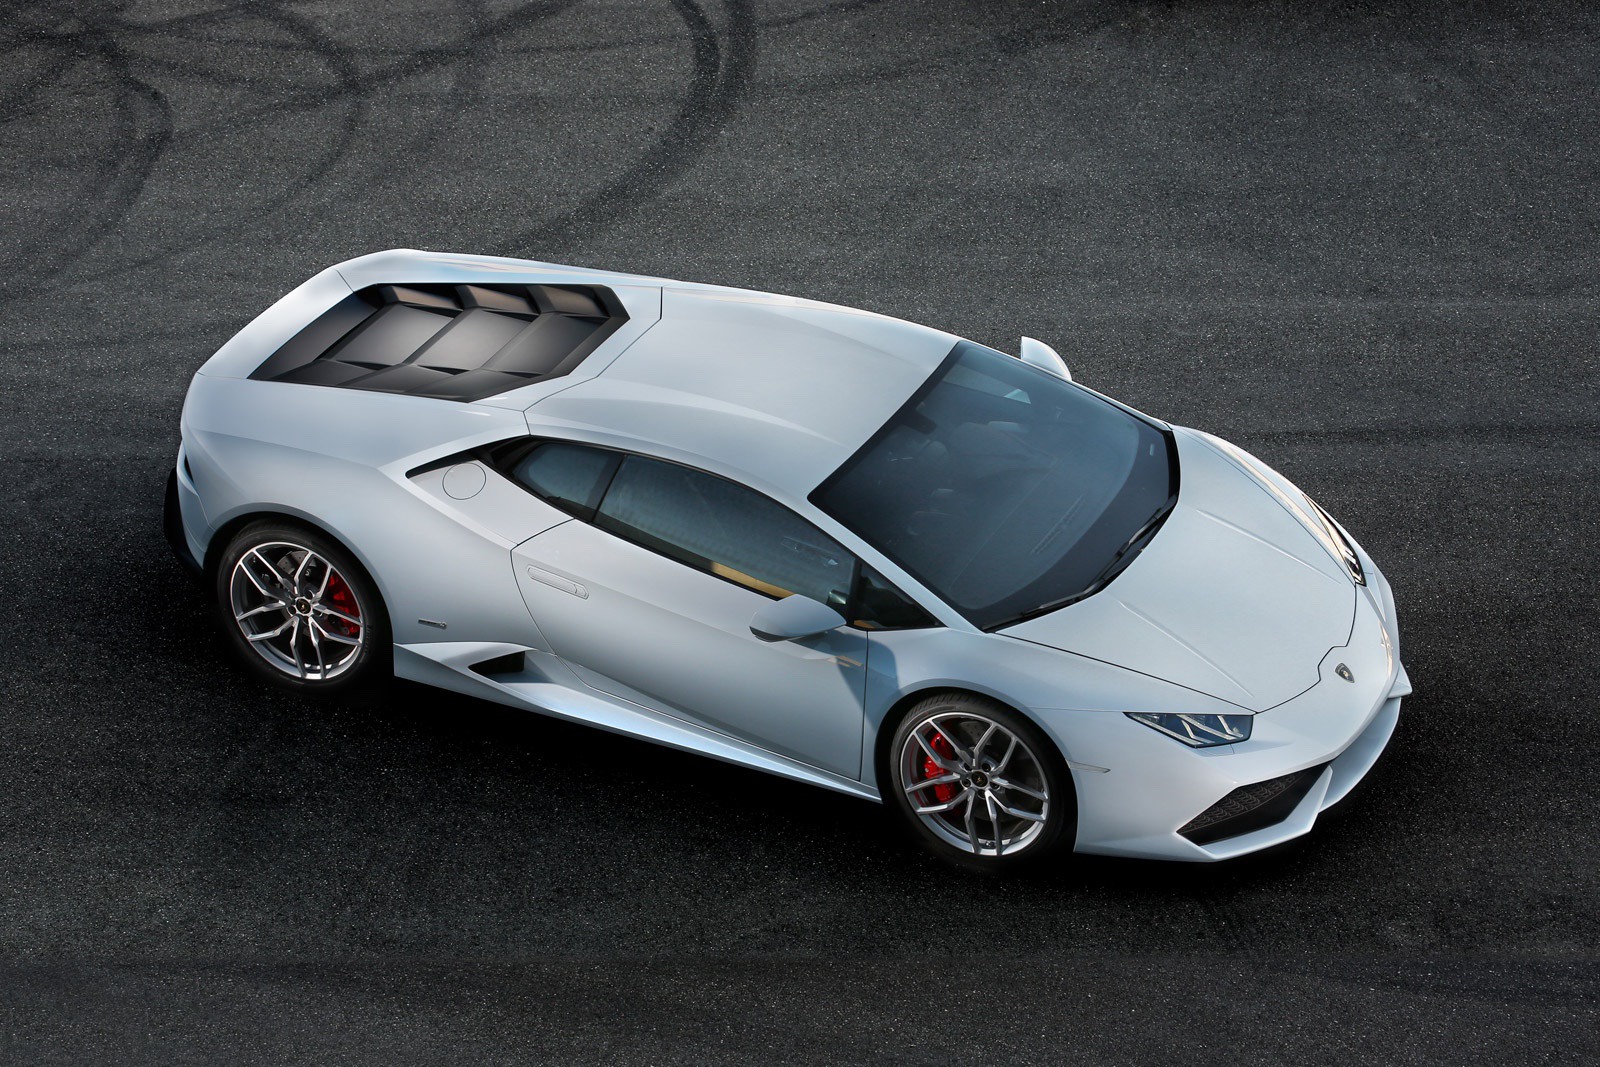 The Huracan was first unveiled at the 2014 Geneva Auto Show